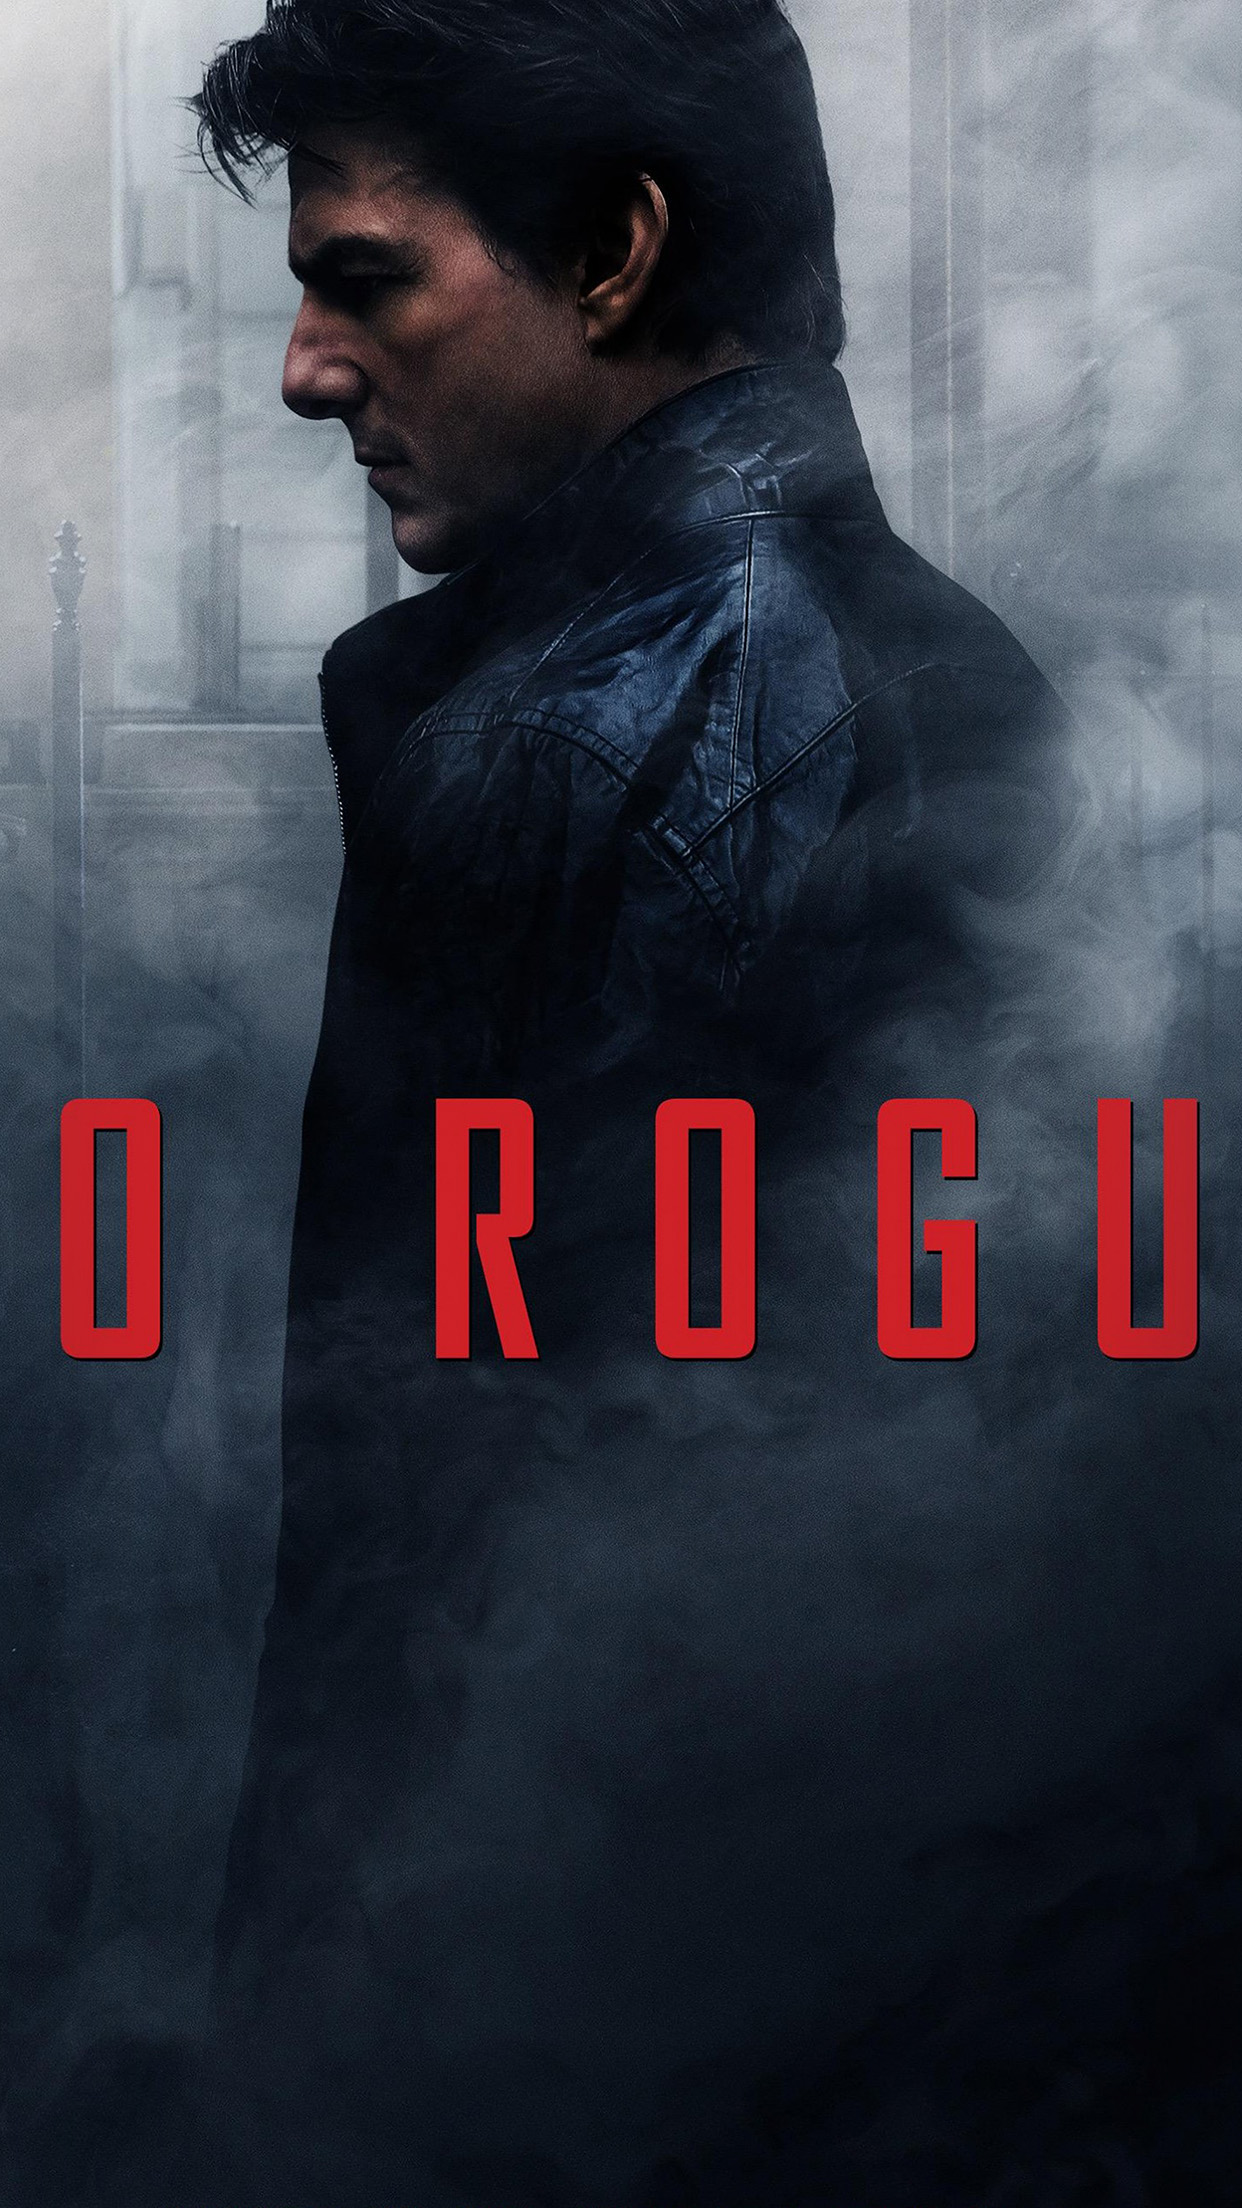 Go Rogue Tom Cruise Poster Film Art Android wallpaper